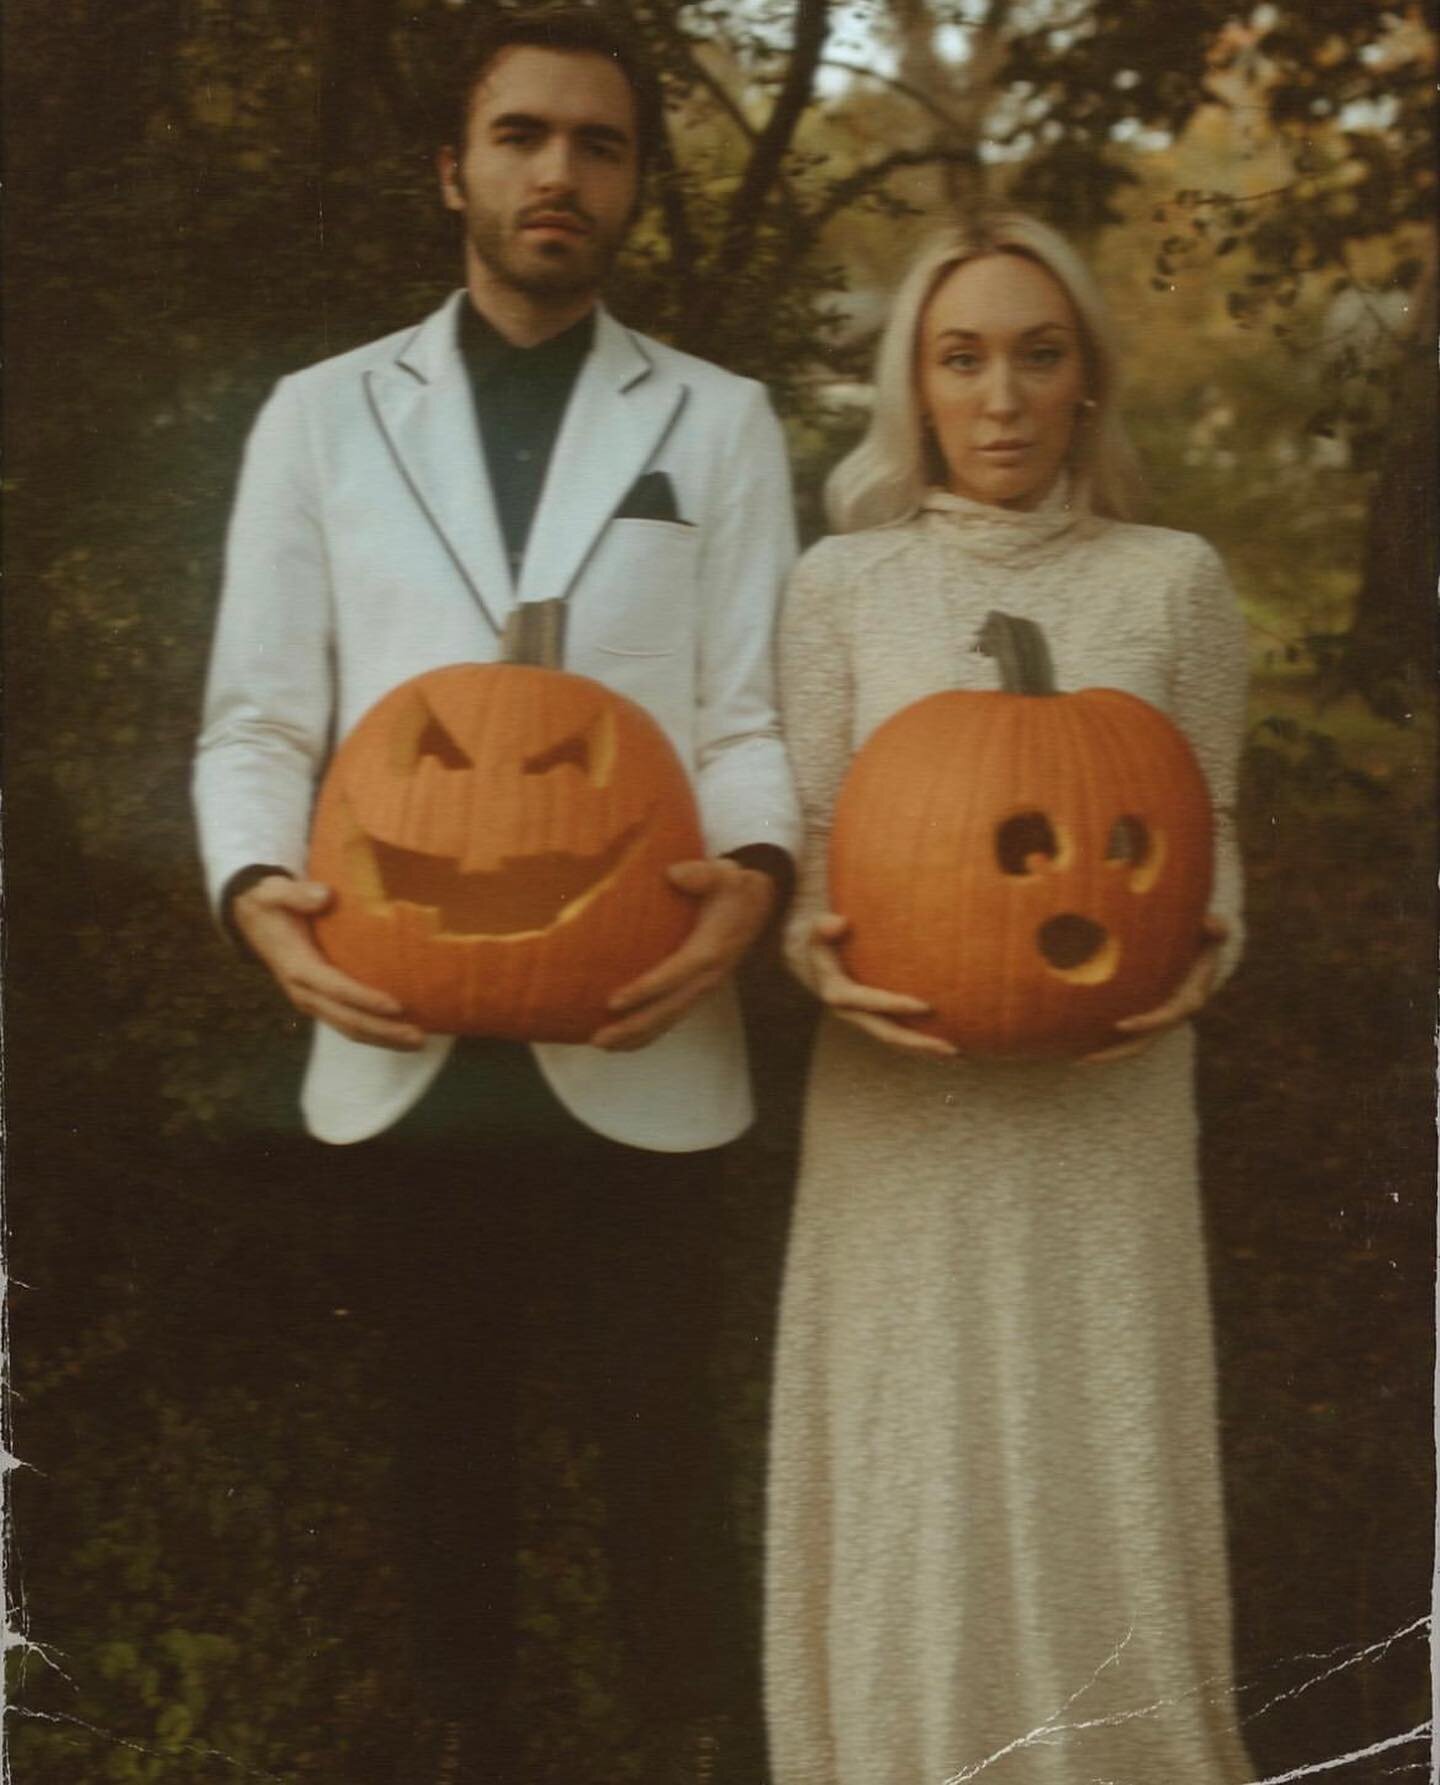 Spooky Szn🎃

Enjoy this work by @gypsymoonphotog 

We are so inspired by themed styled wedding shoots! Fall is the perfect time of year to get creative😍✨

Get creative with your own beauty looks by joining our bridal beauty tribe! Use the link in o